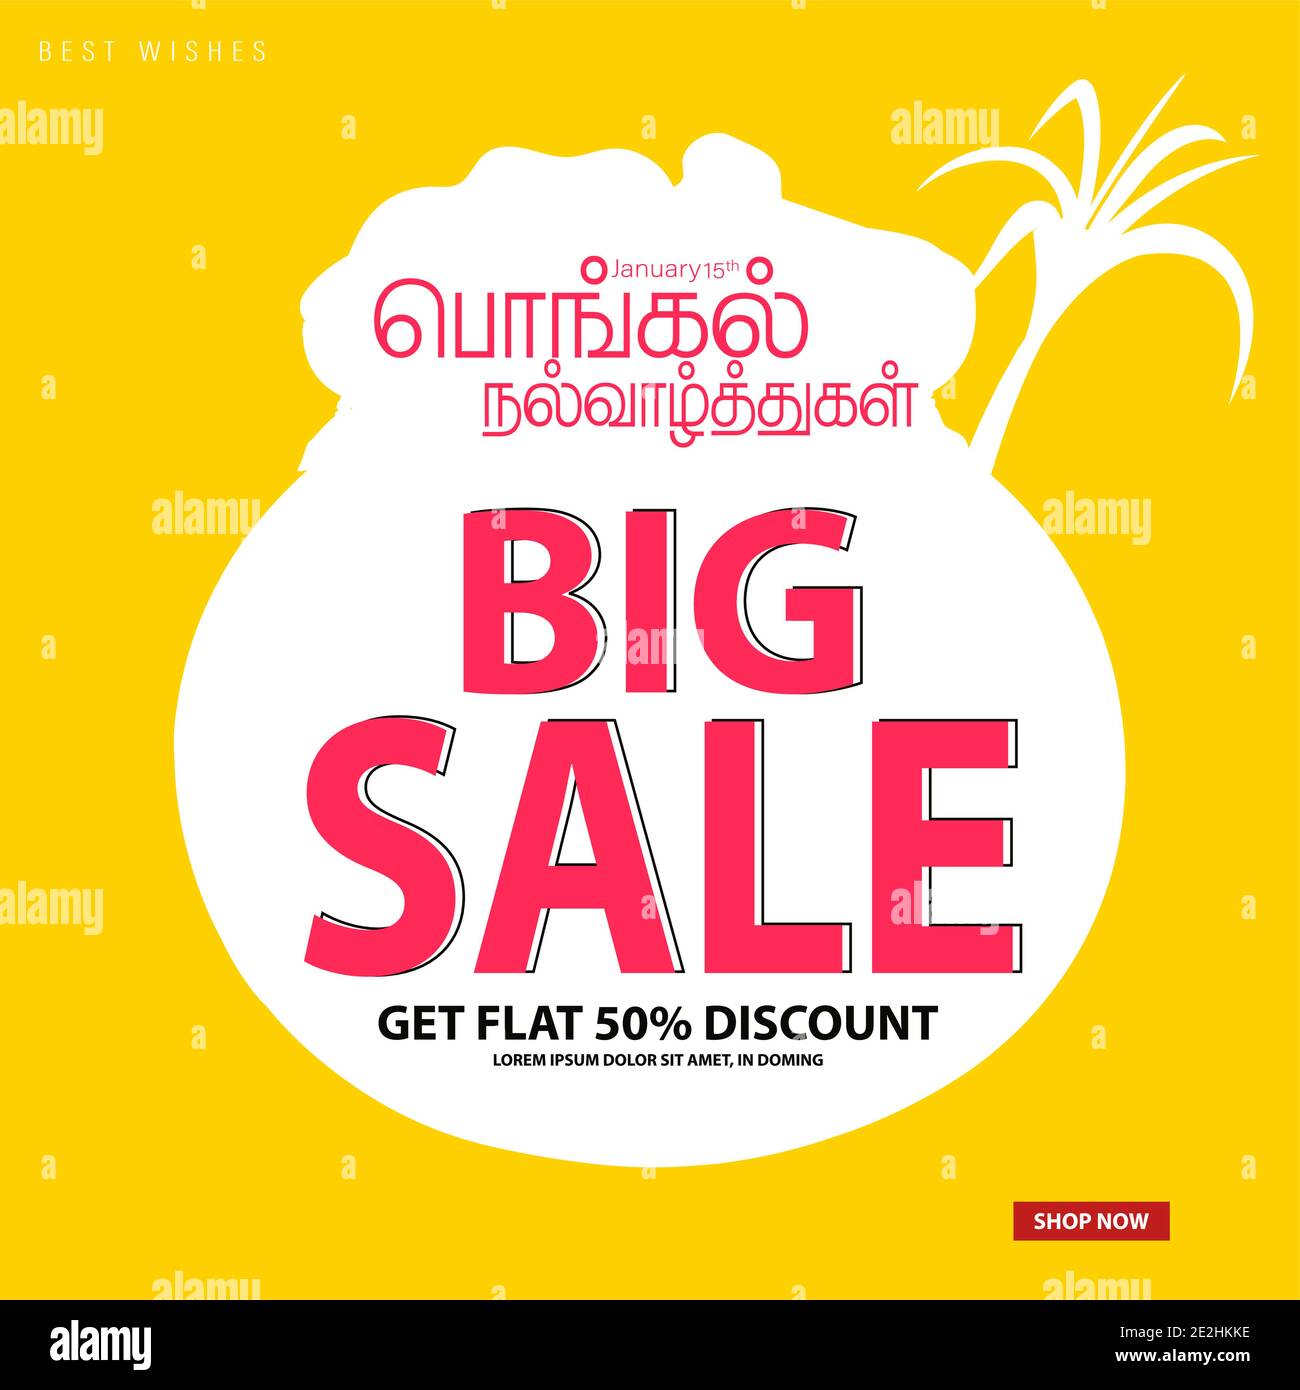 South Indian Festival Pongal Offer, Sale Background Template with 50% Discount Stock Vector